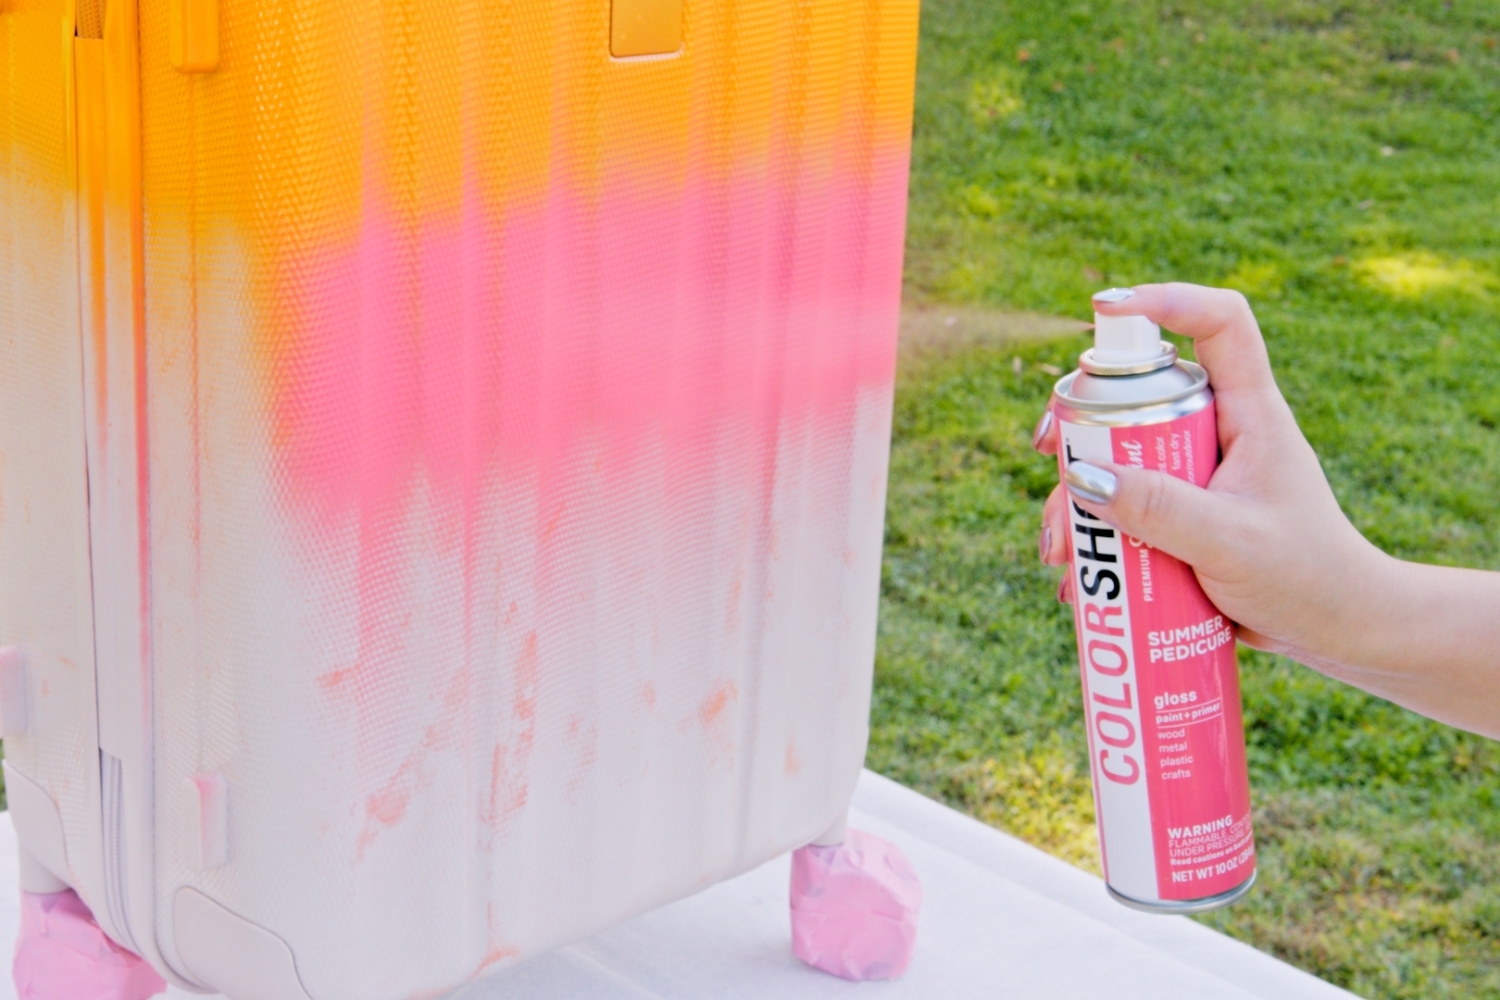 Apply the next color of spray paint to the suitcase